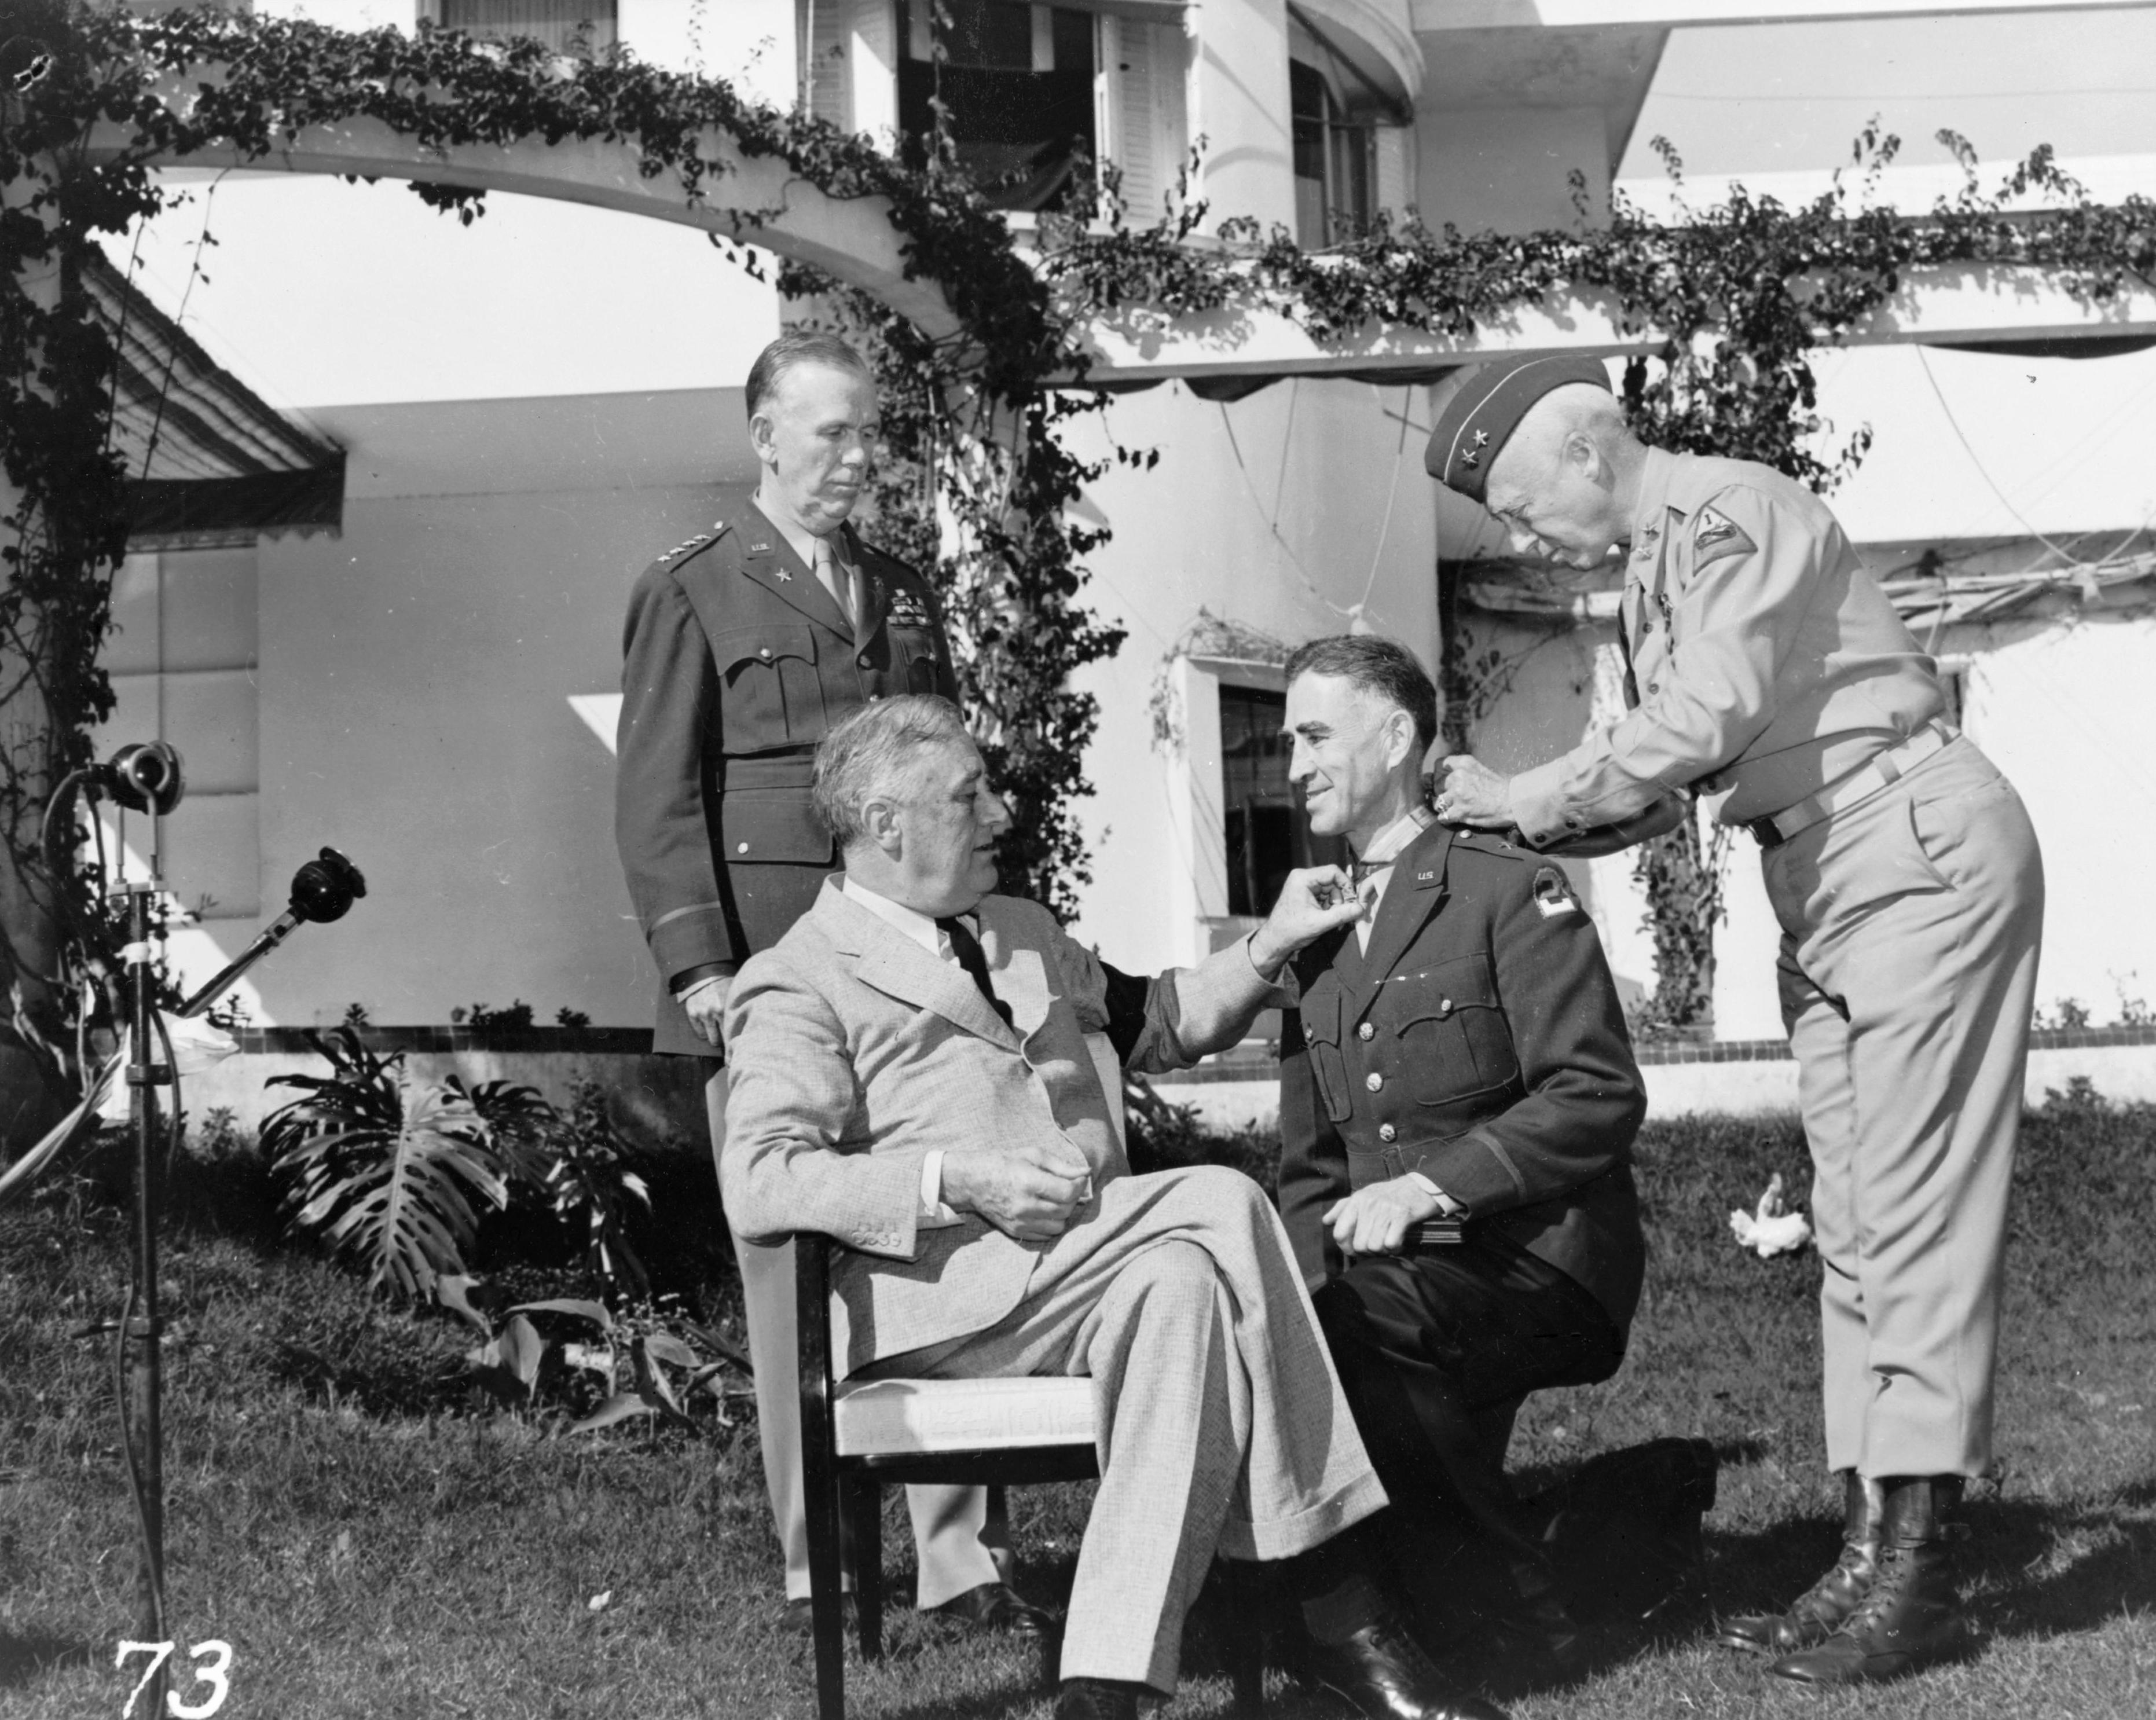 Franklin Roosevelt awarding Brigadier General William Wilbur the Medal of Honor, Casablanca, French Morocco, 22 Jan 1943; note George Marshall in background and George Patton assisting. Photo 2 of 2.